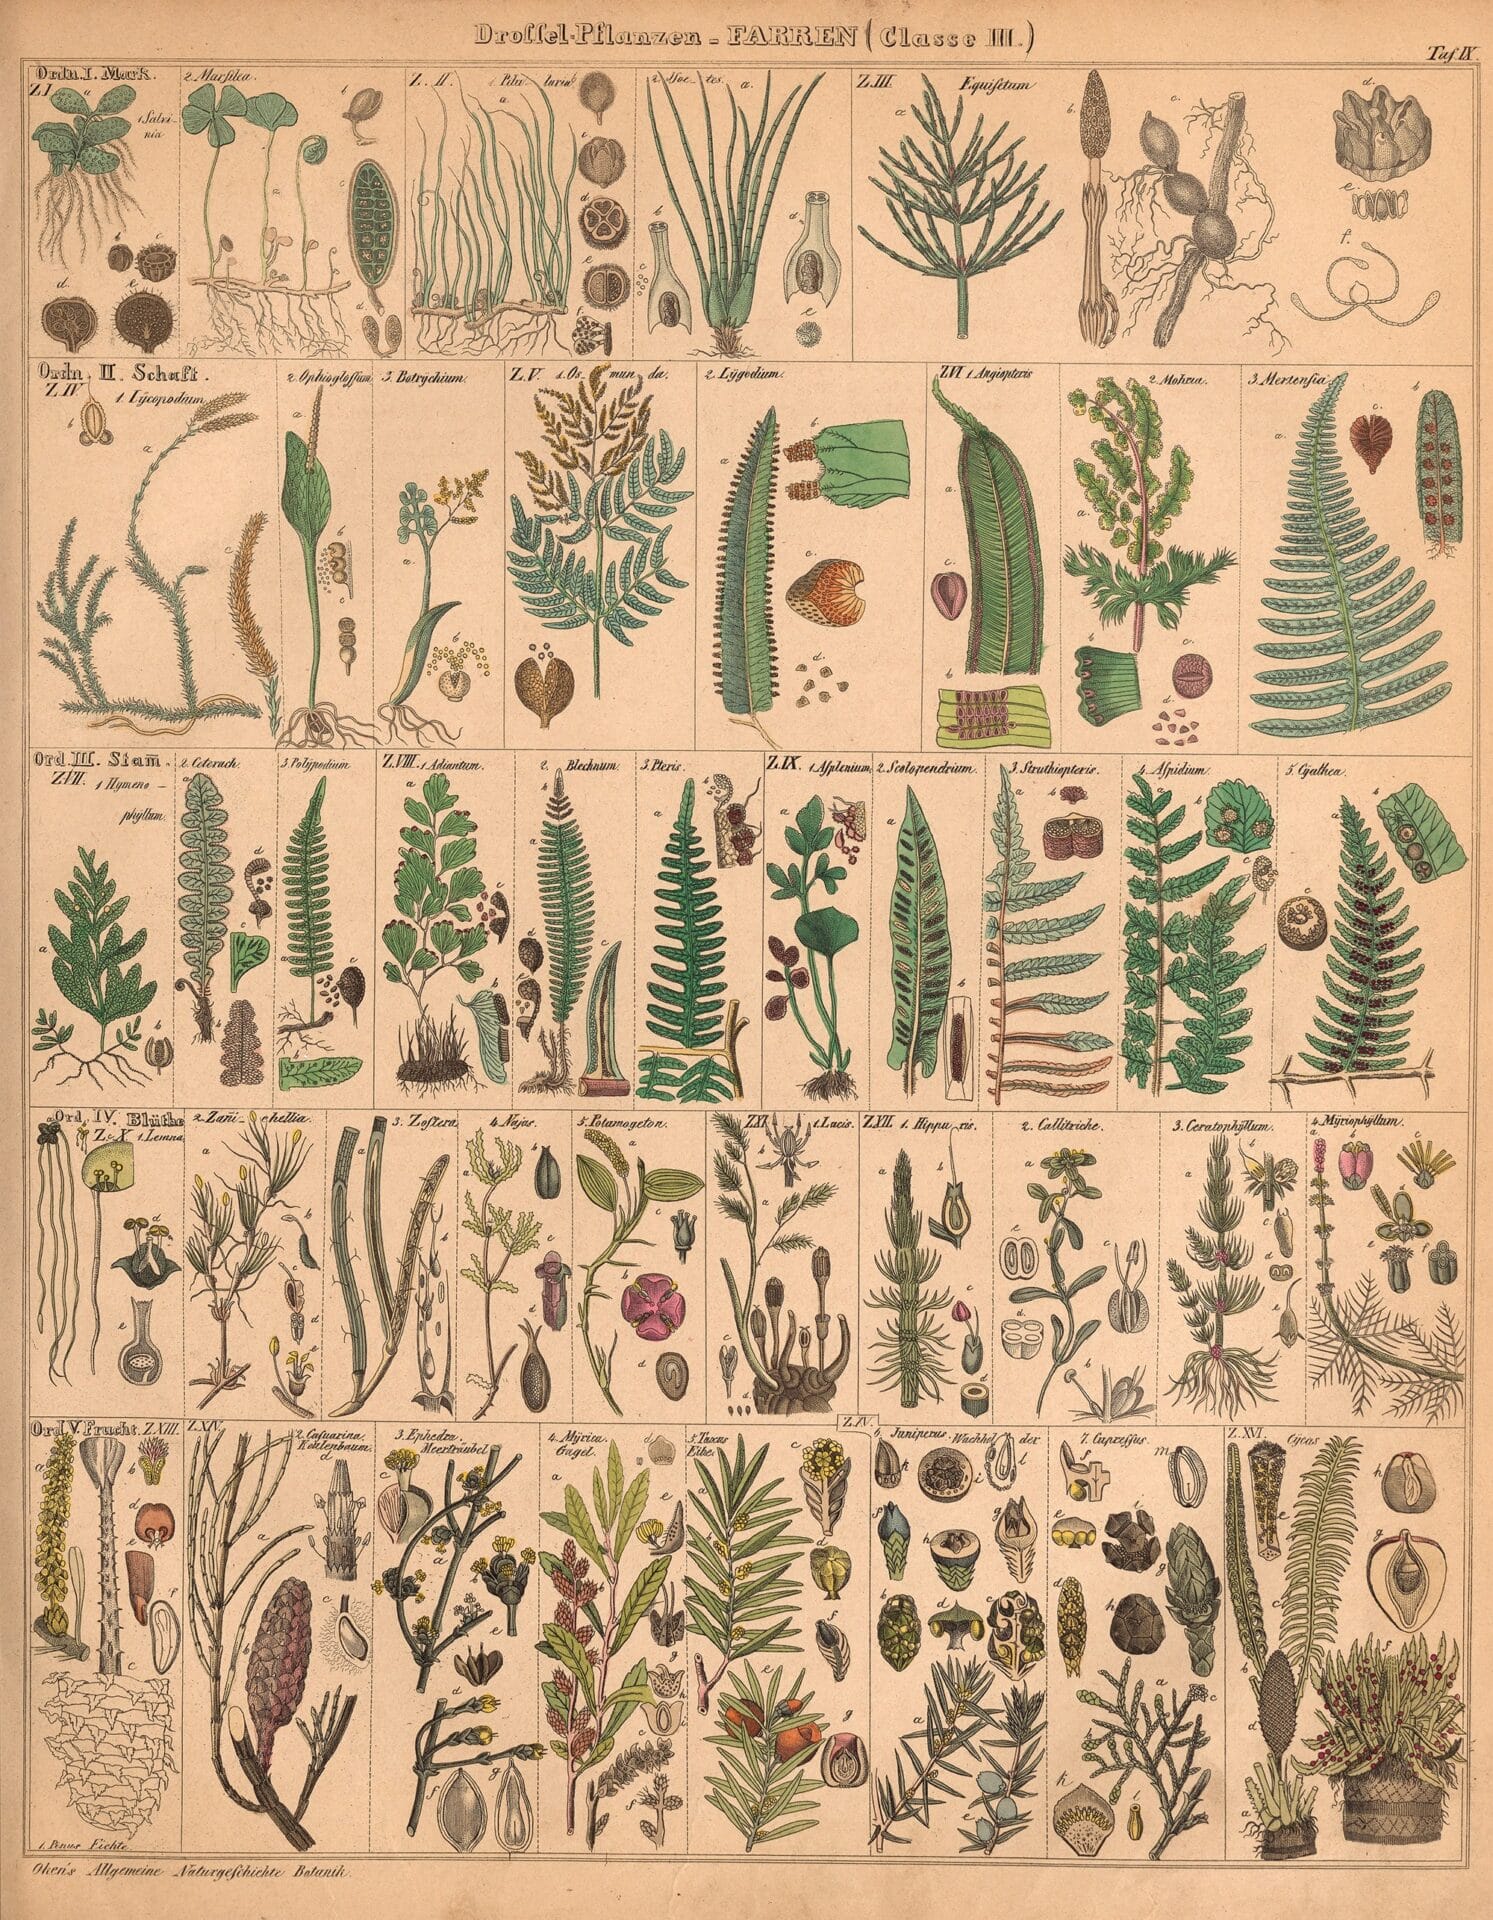 an 18th-century natural history book illustration of ferns, categorized on the page into a grid showing their seeds and different stages of growth